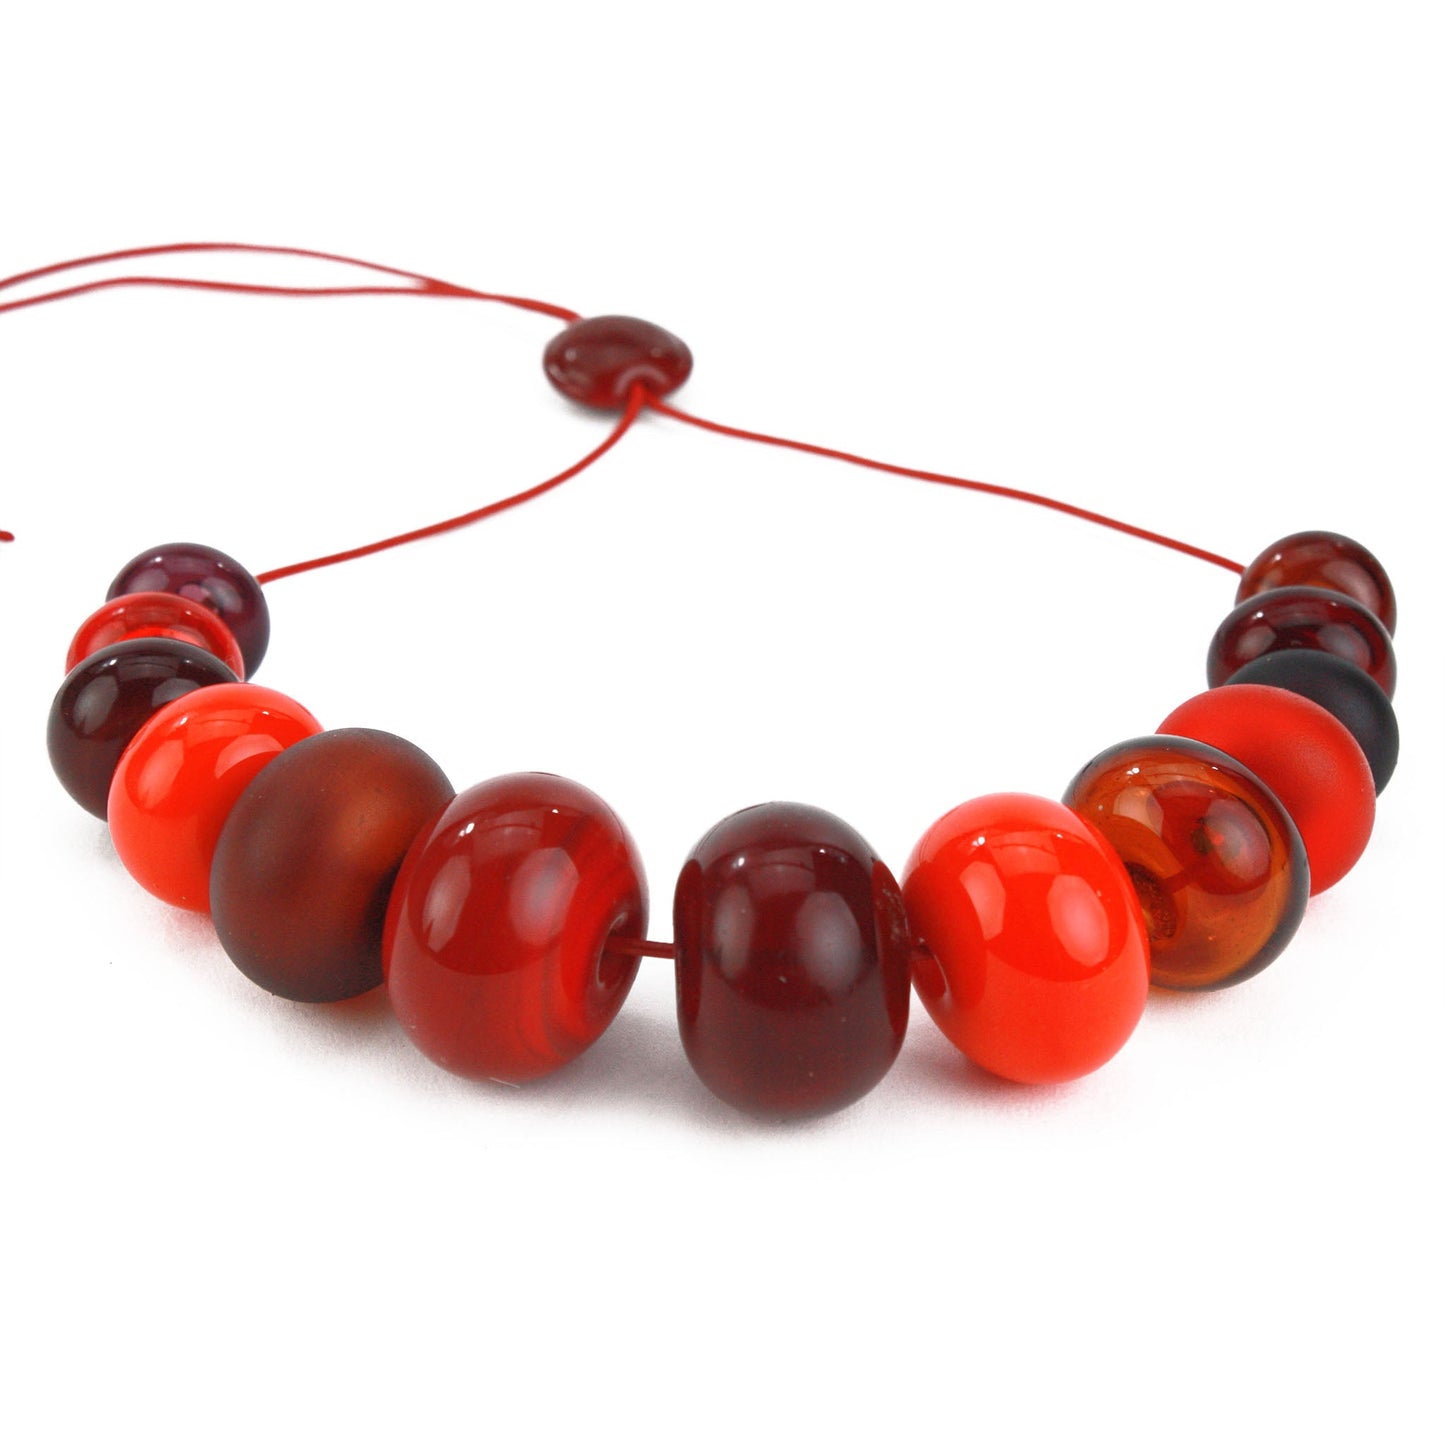 13 bead Bubble necklace - mixed shades of reds, oranges and purple